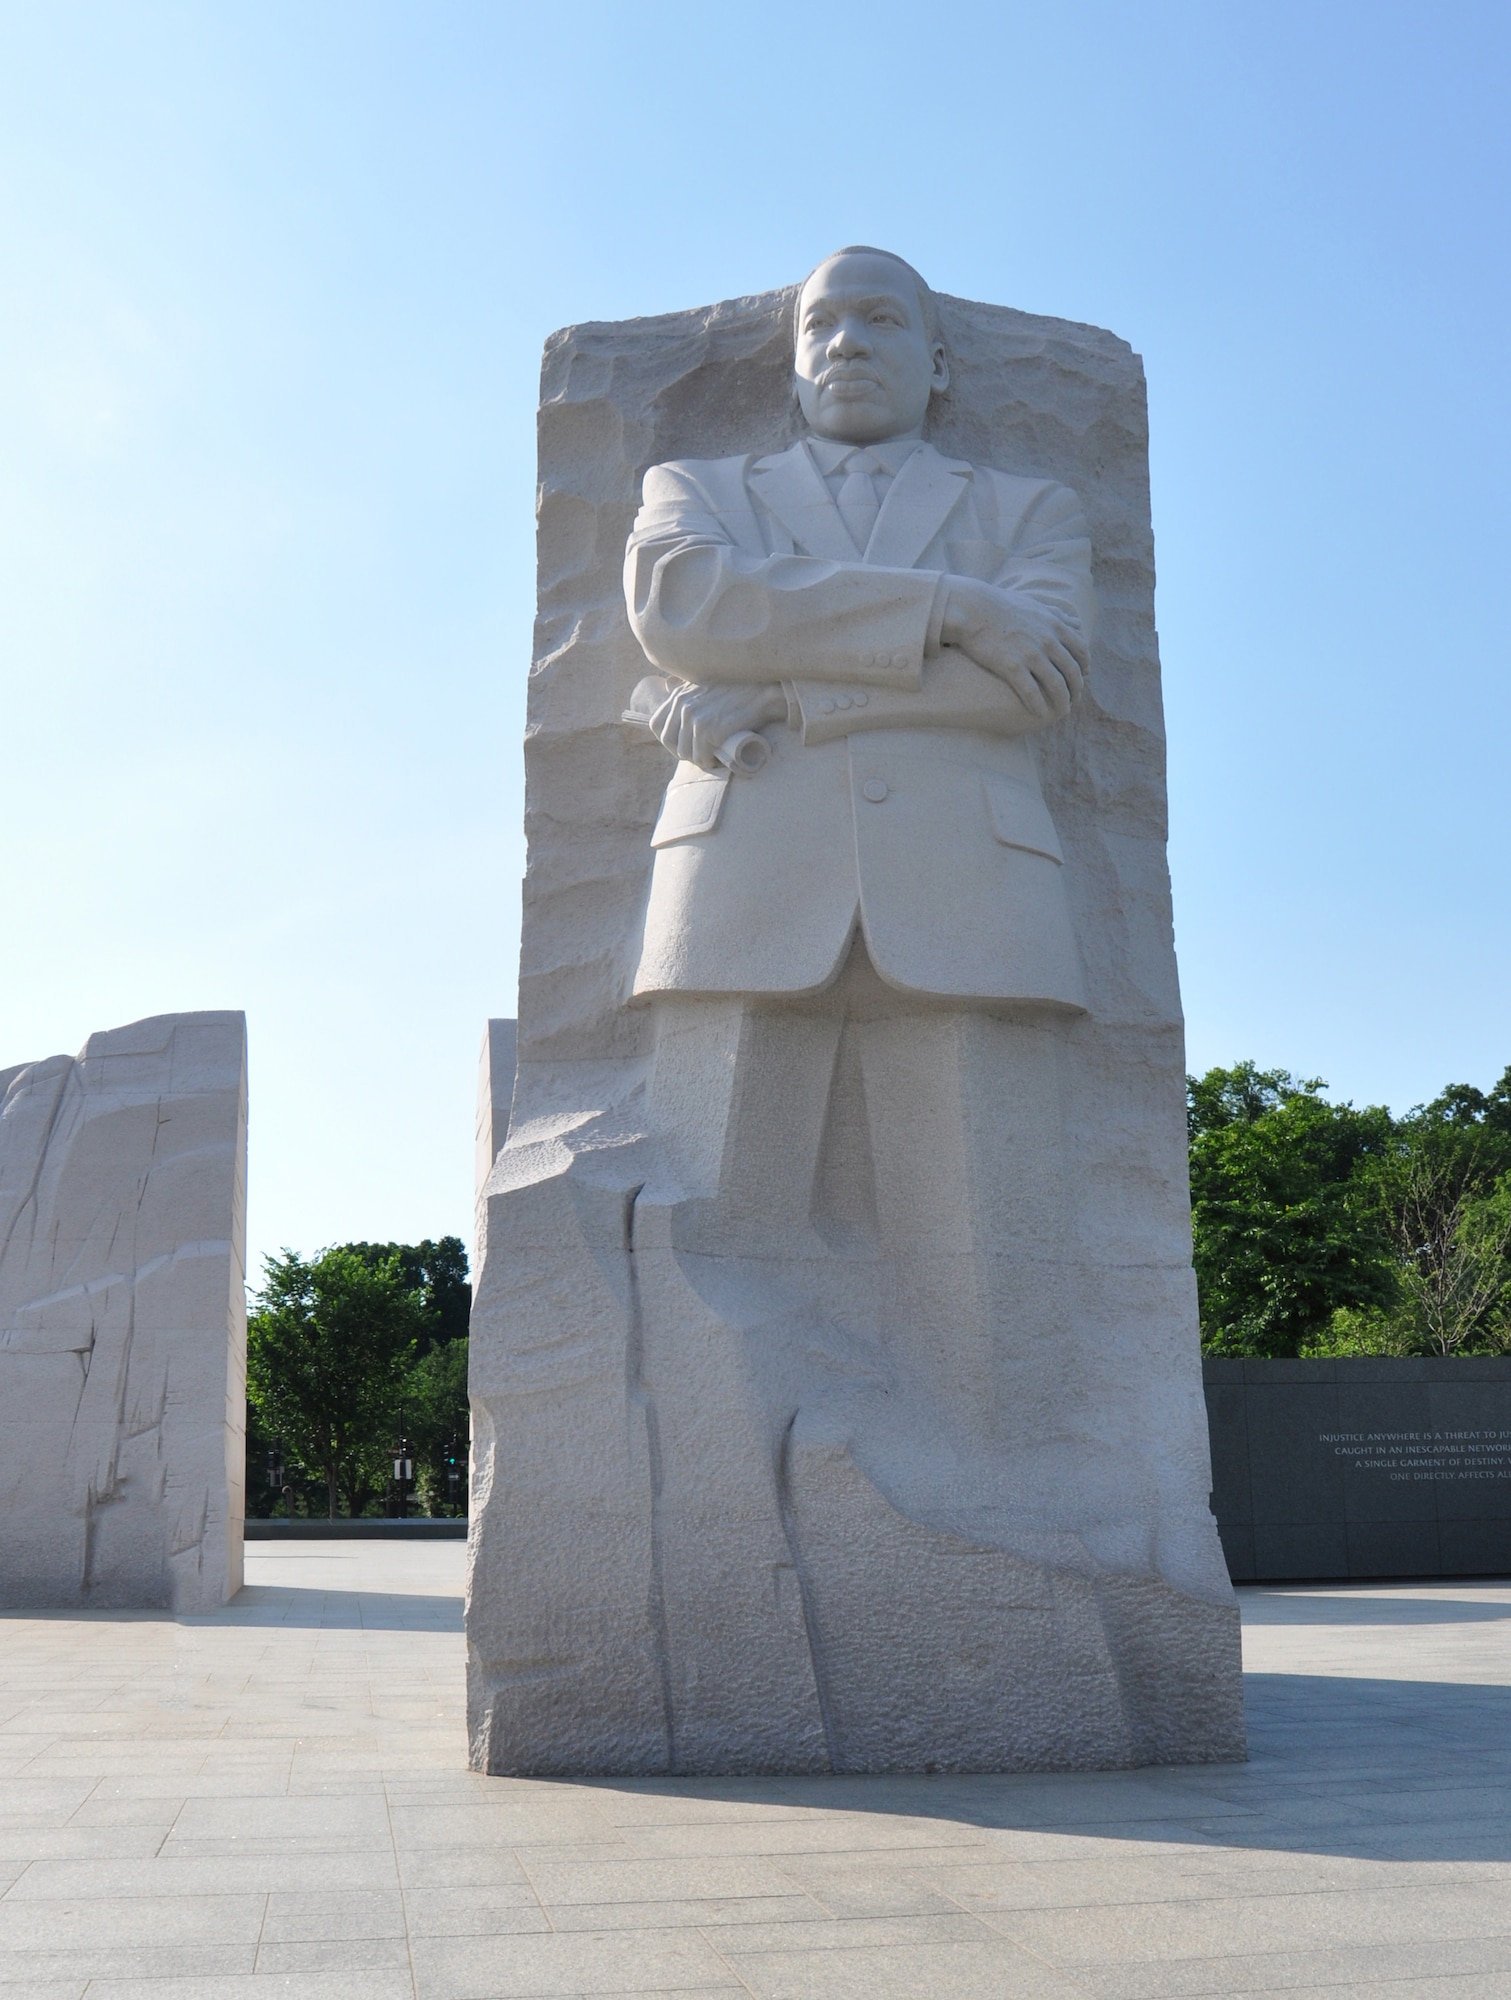 front view of Dr. Martin Luther King Jr.'s 30 foot sculpture located at the National Mall in Washington D.C.